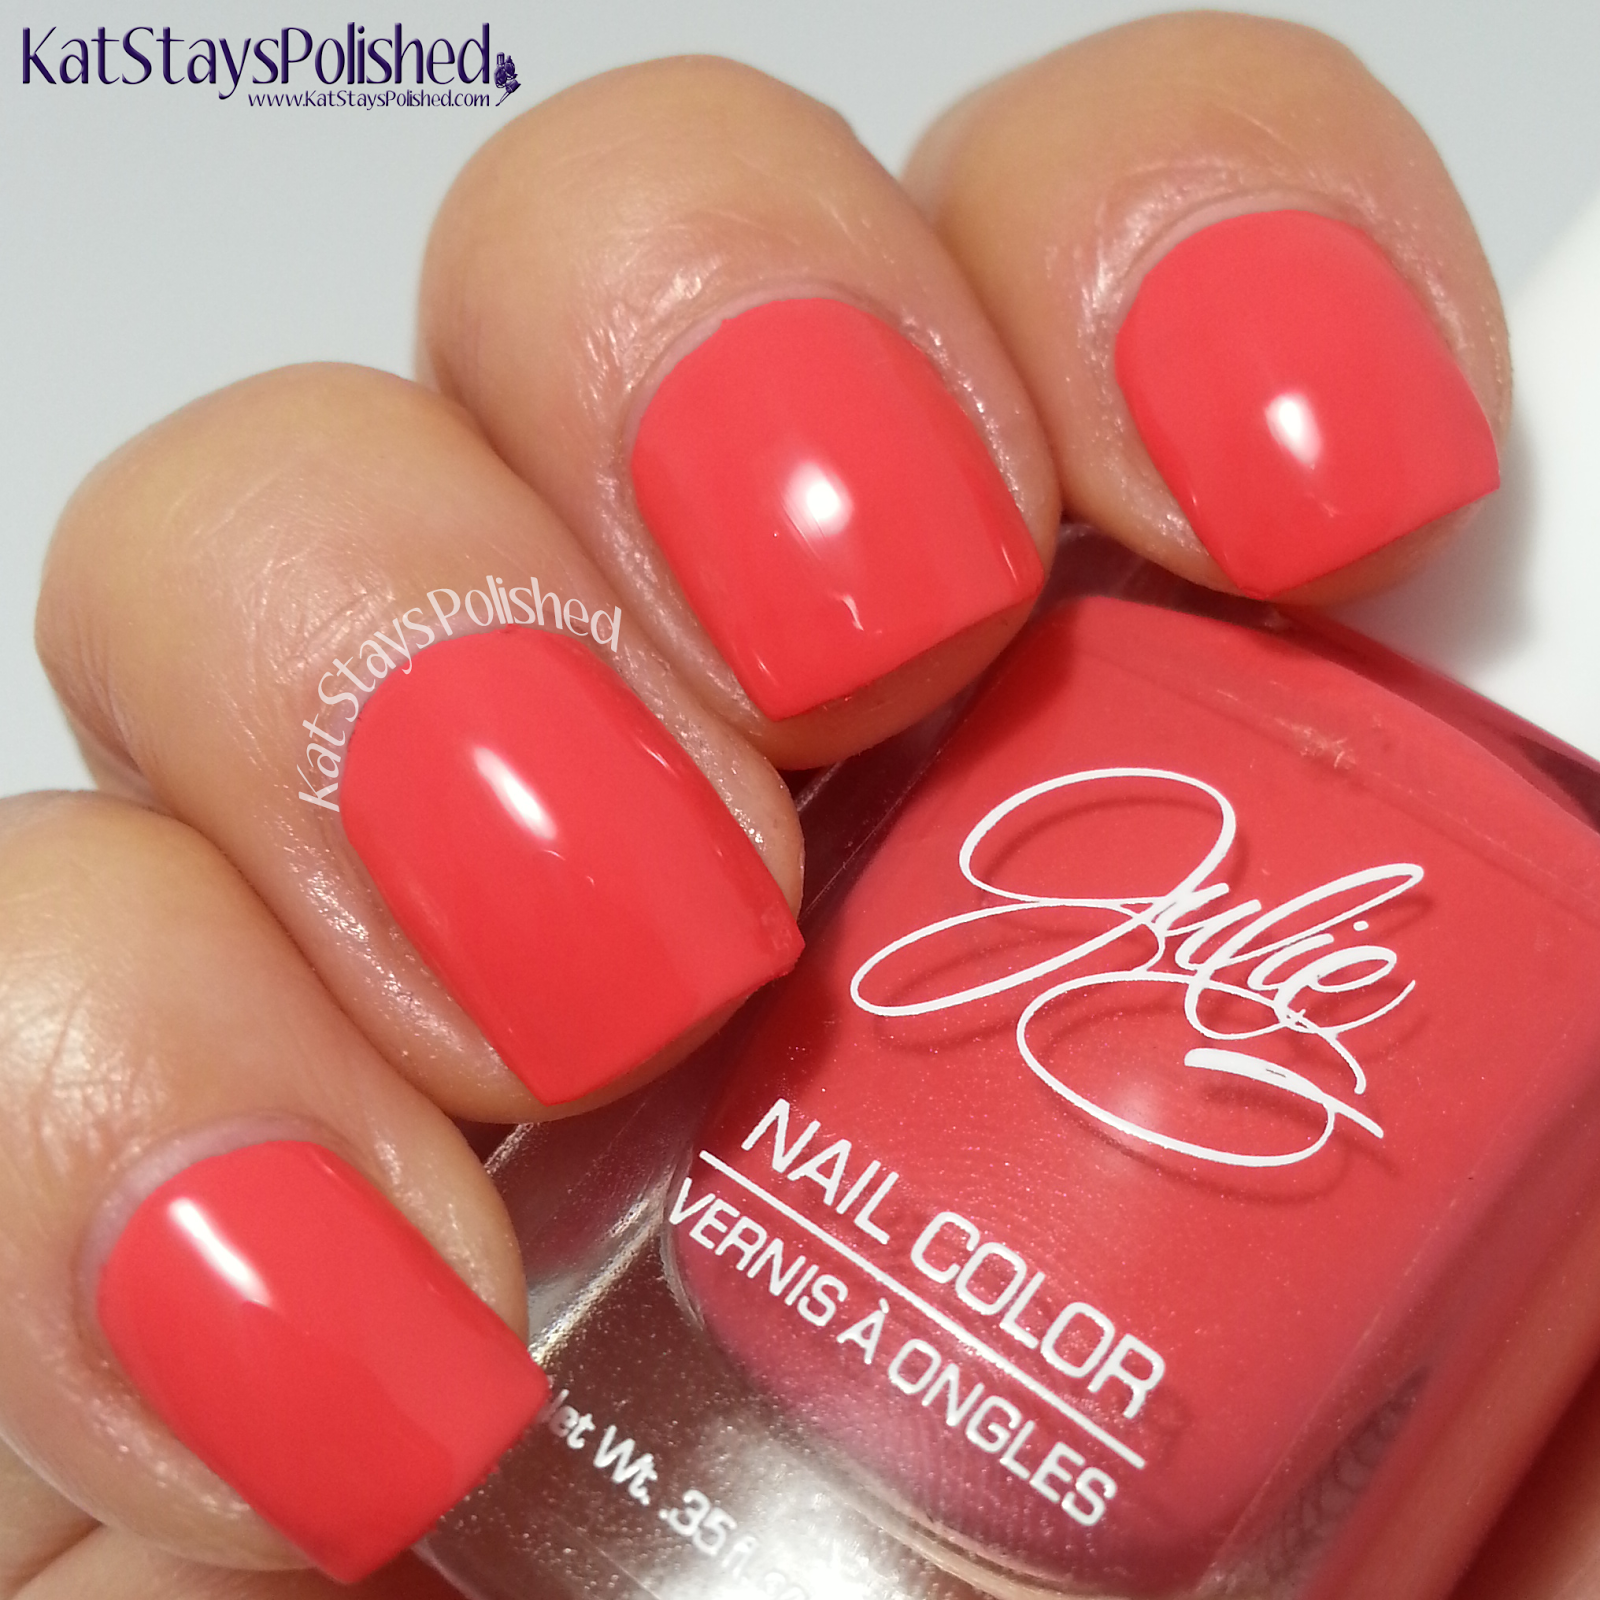 JulieG Cruise Time Collection - Miami Beach | Kat Stays Polished